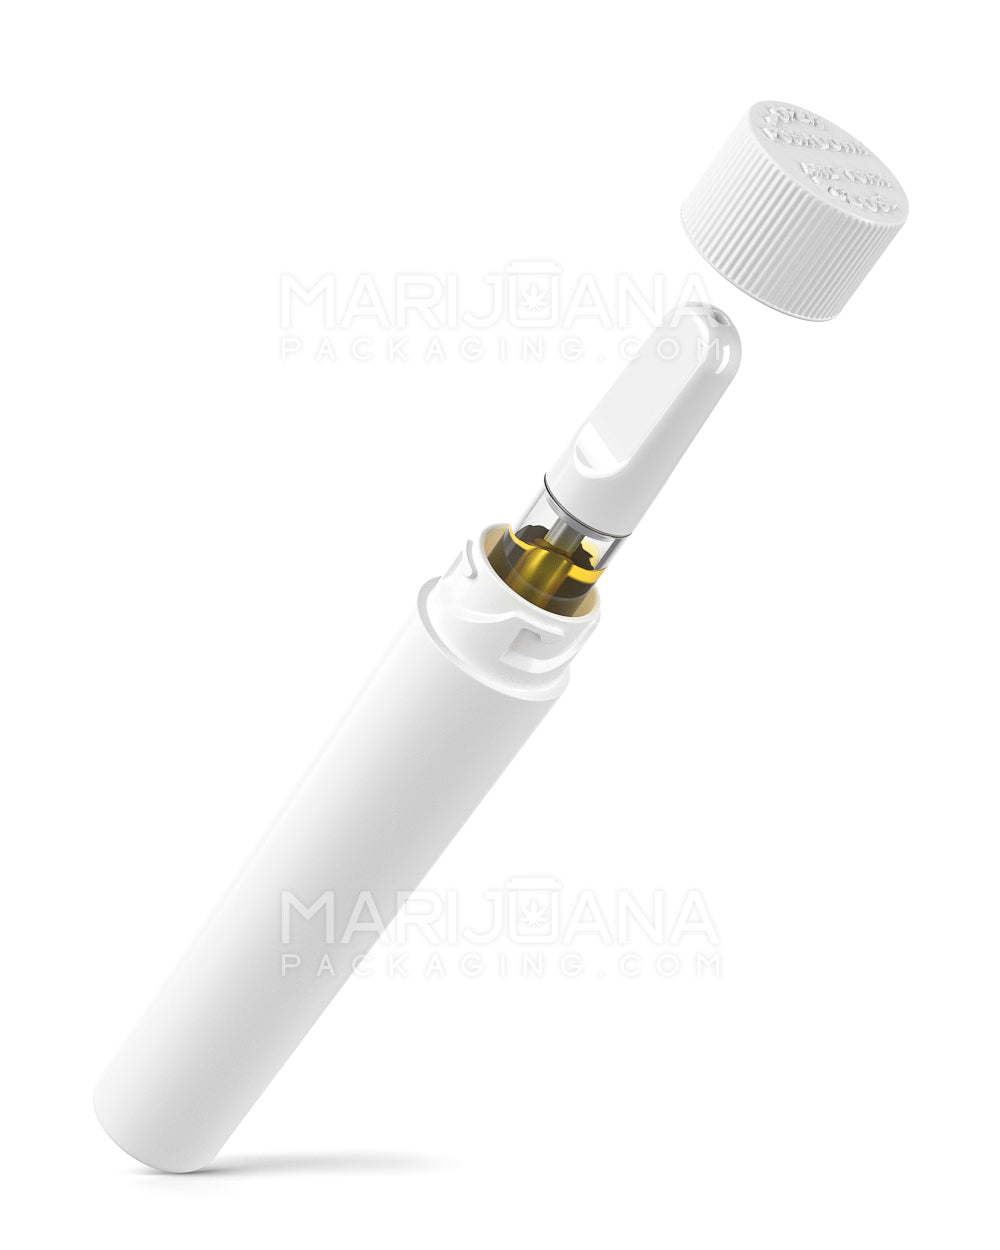 Child Resistant | Push Down & Turn Vape Cartridge Container | 72mm - White Plastic - 1650 Count - 2